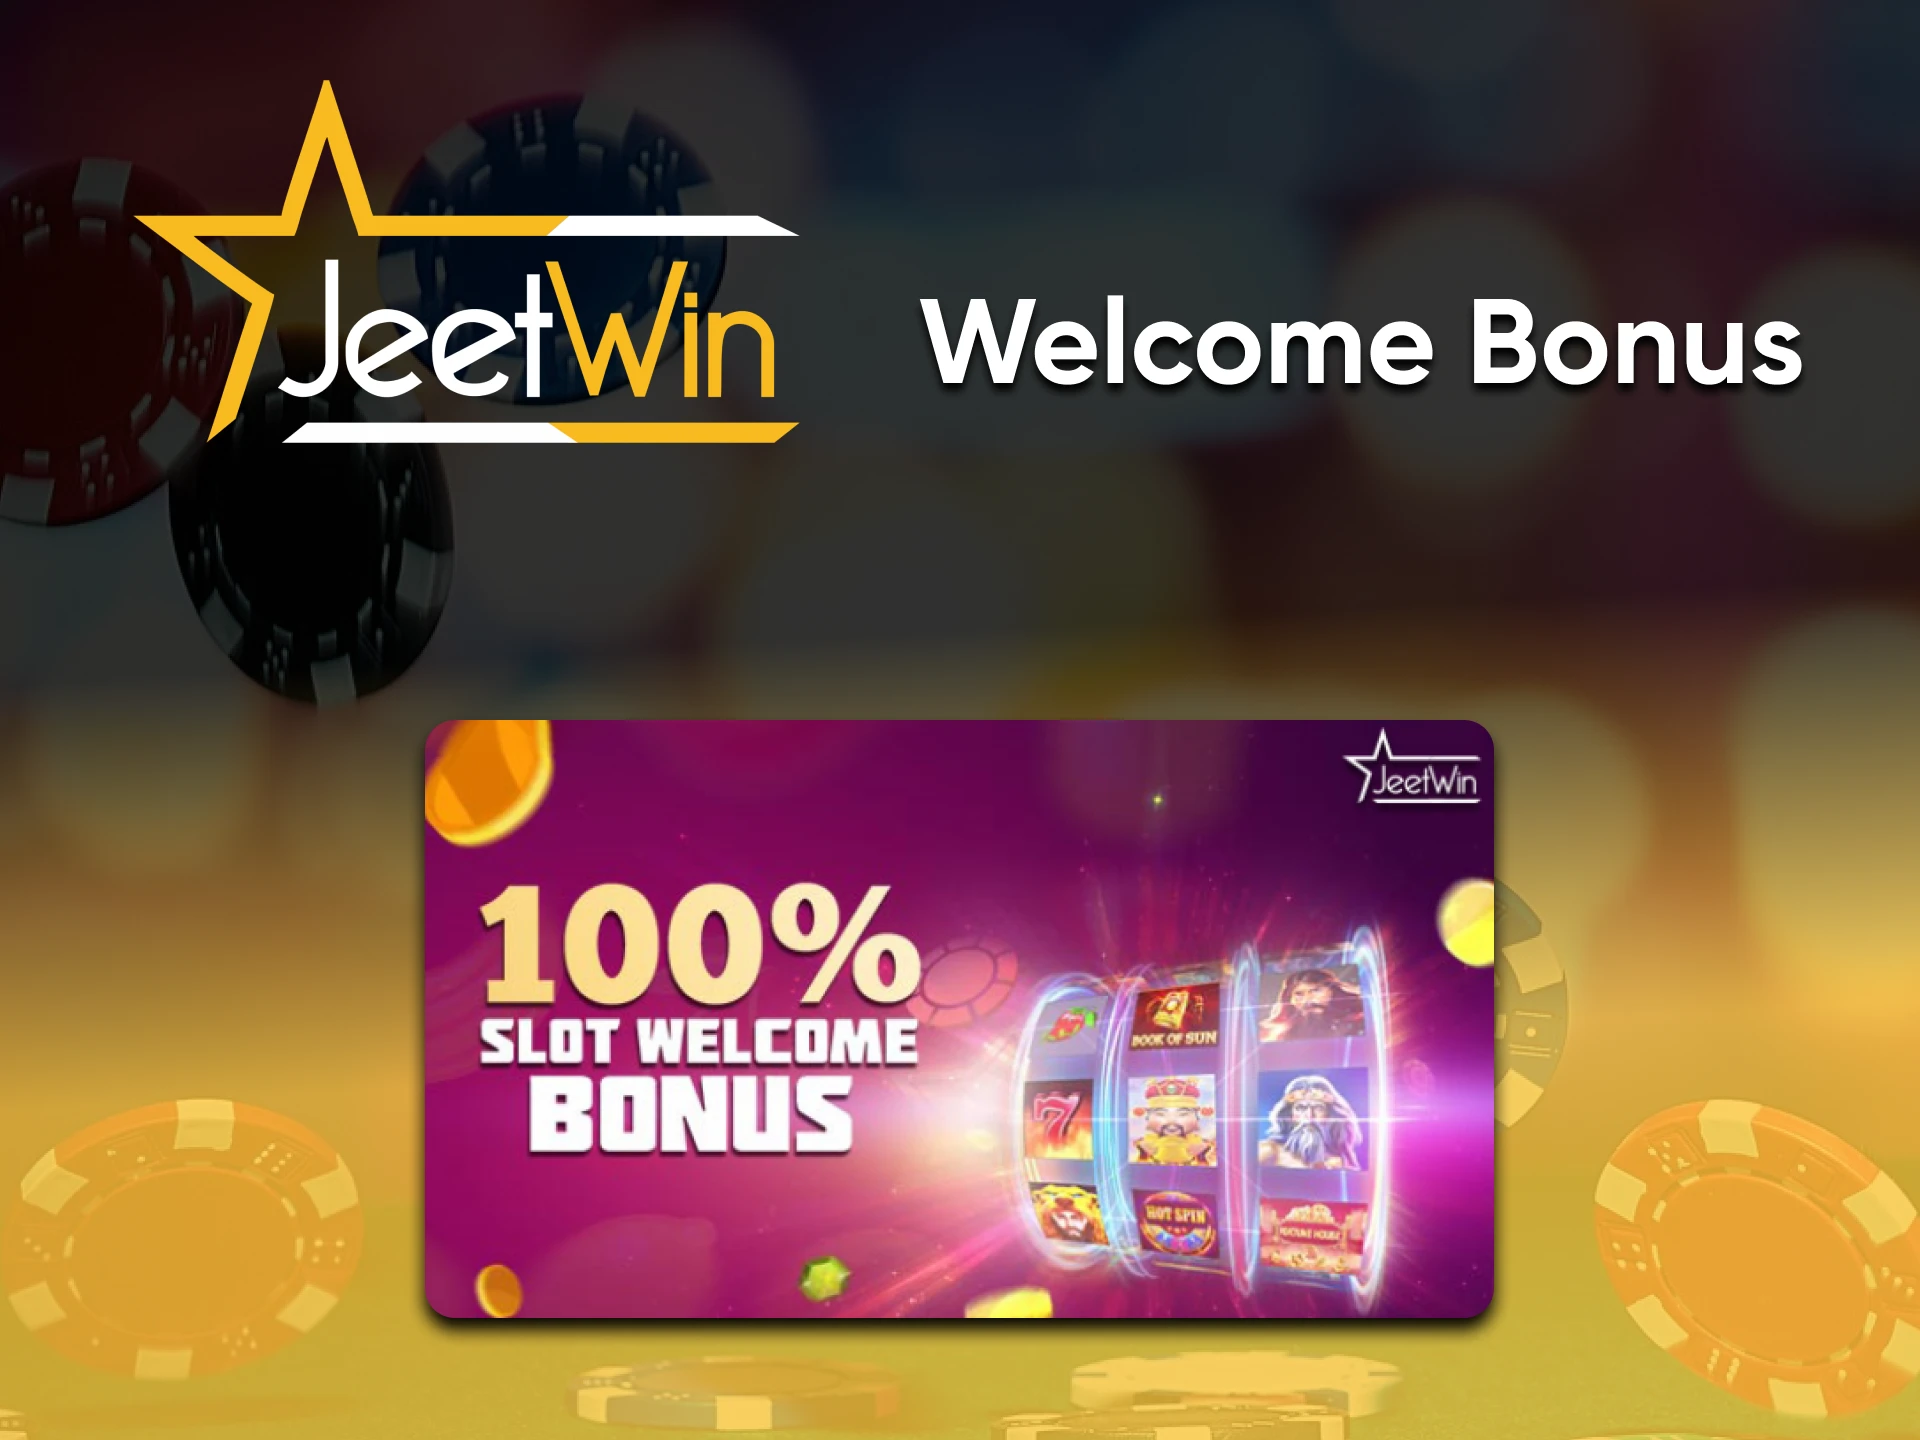 Fund your Jeetwin casino gaming account and get a bonus.